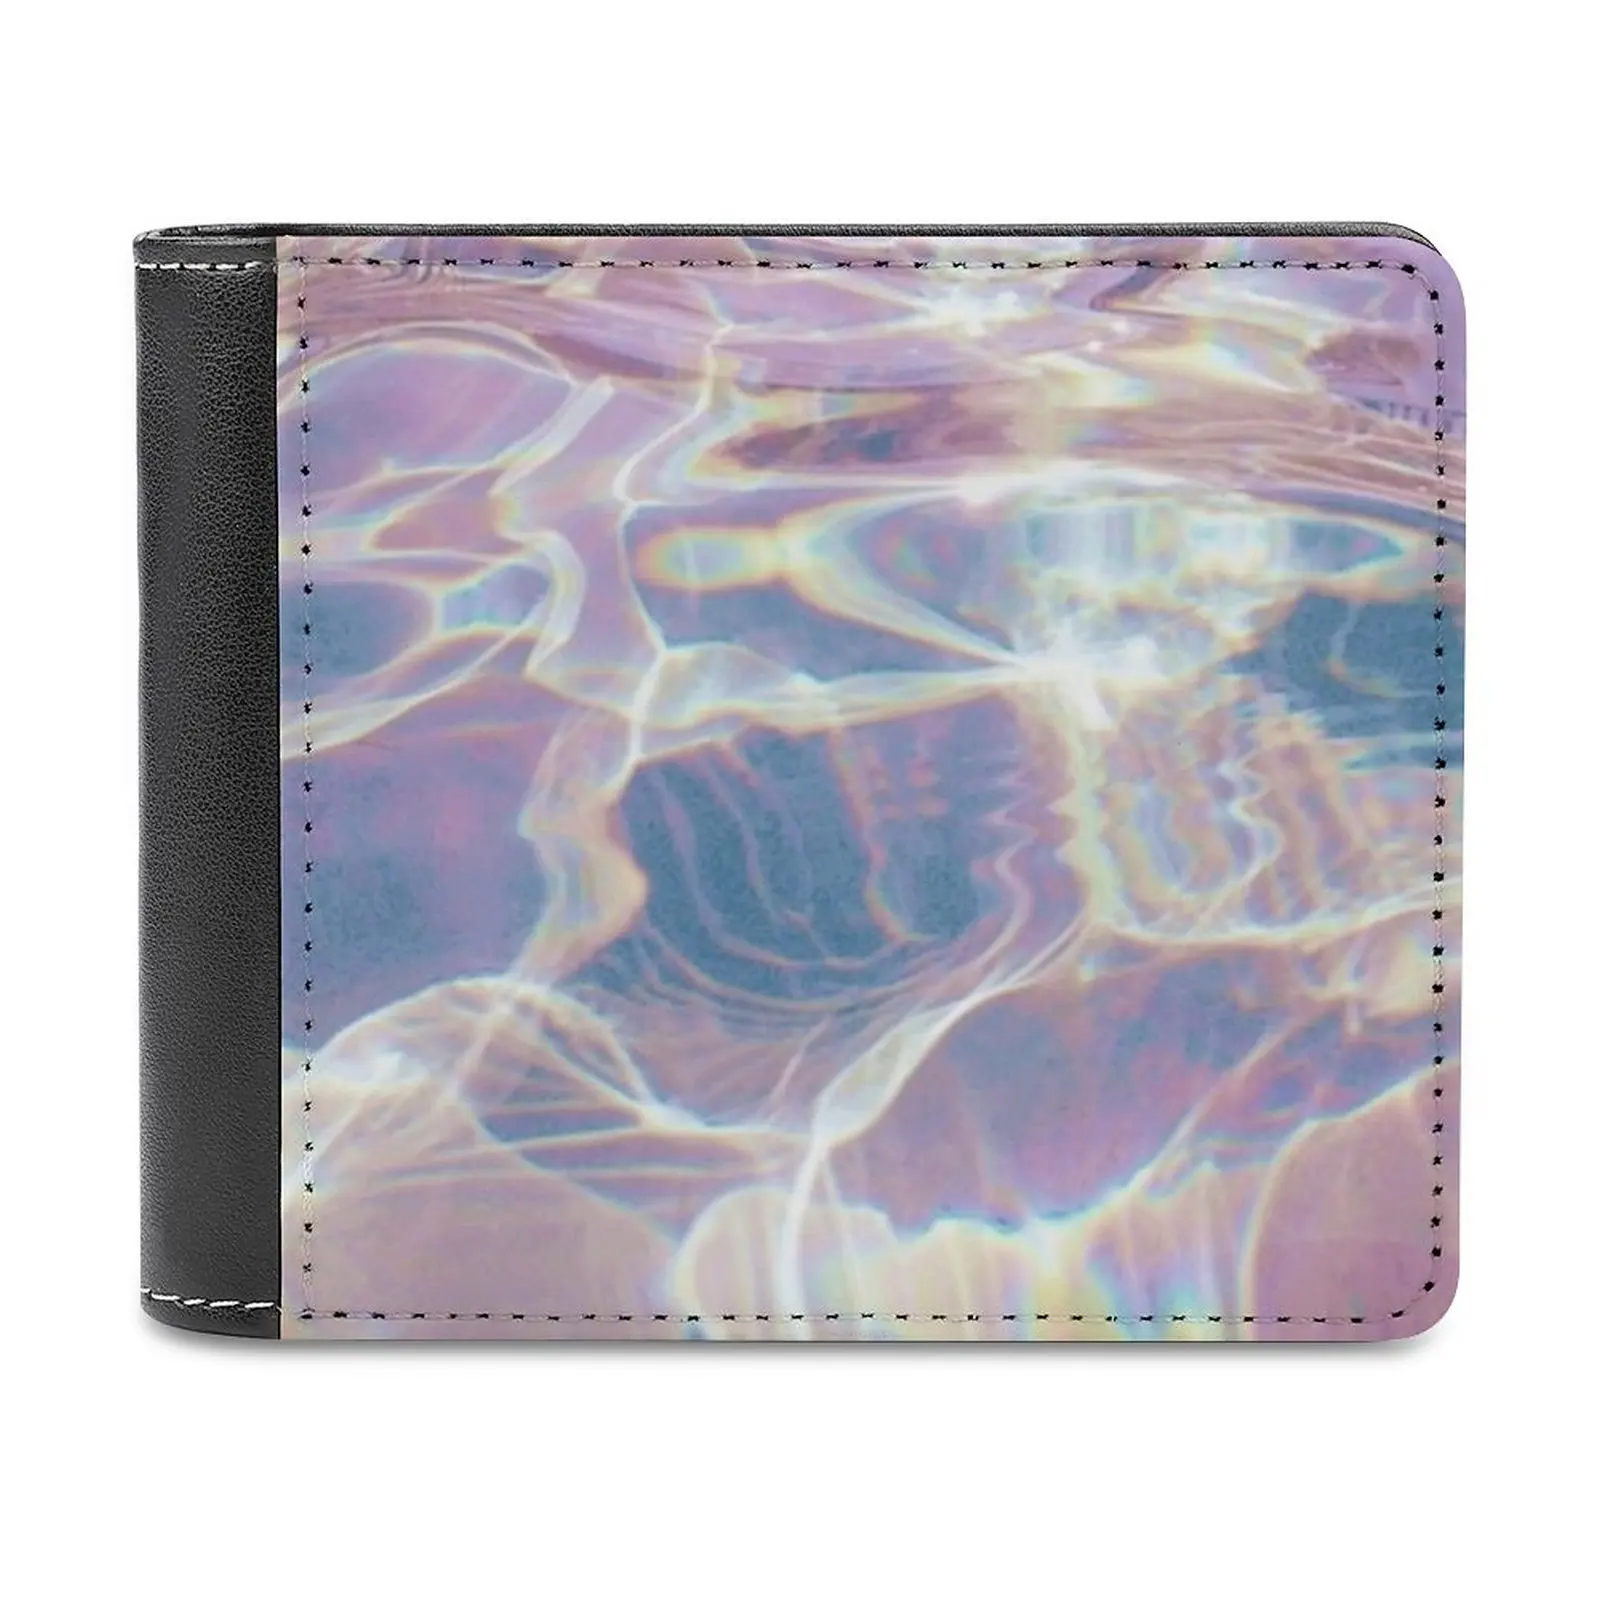 

Holographic Waters Leather Wallet Men Classic Black Purse Credit Card Holder Fashion Men's Wallet Holographic Water Tumblr